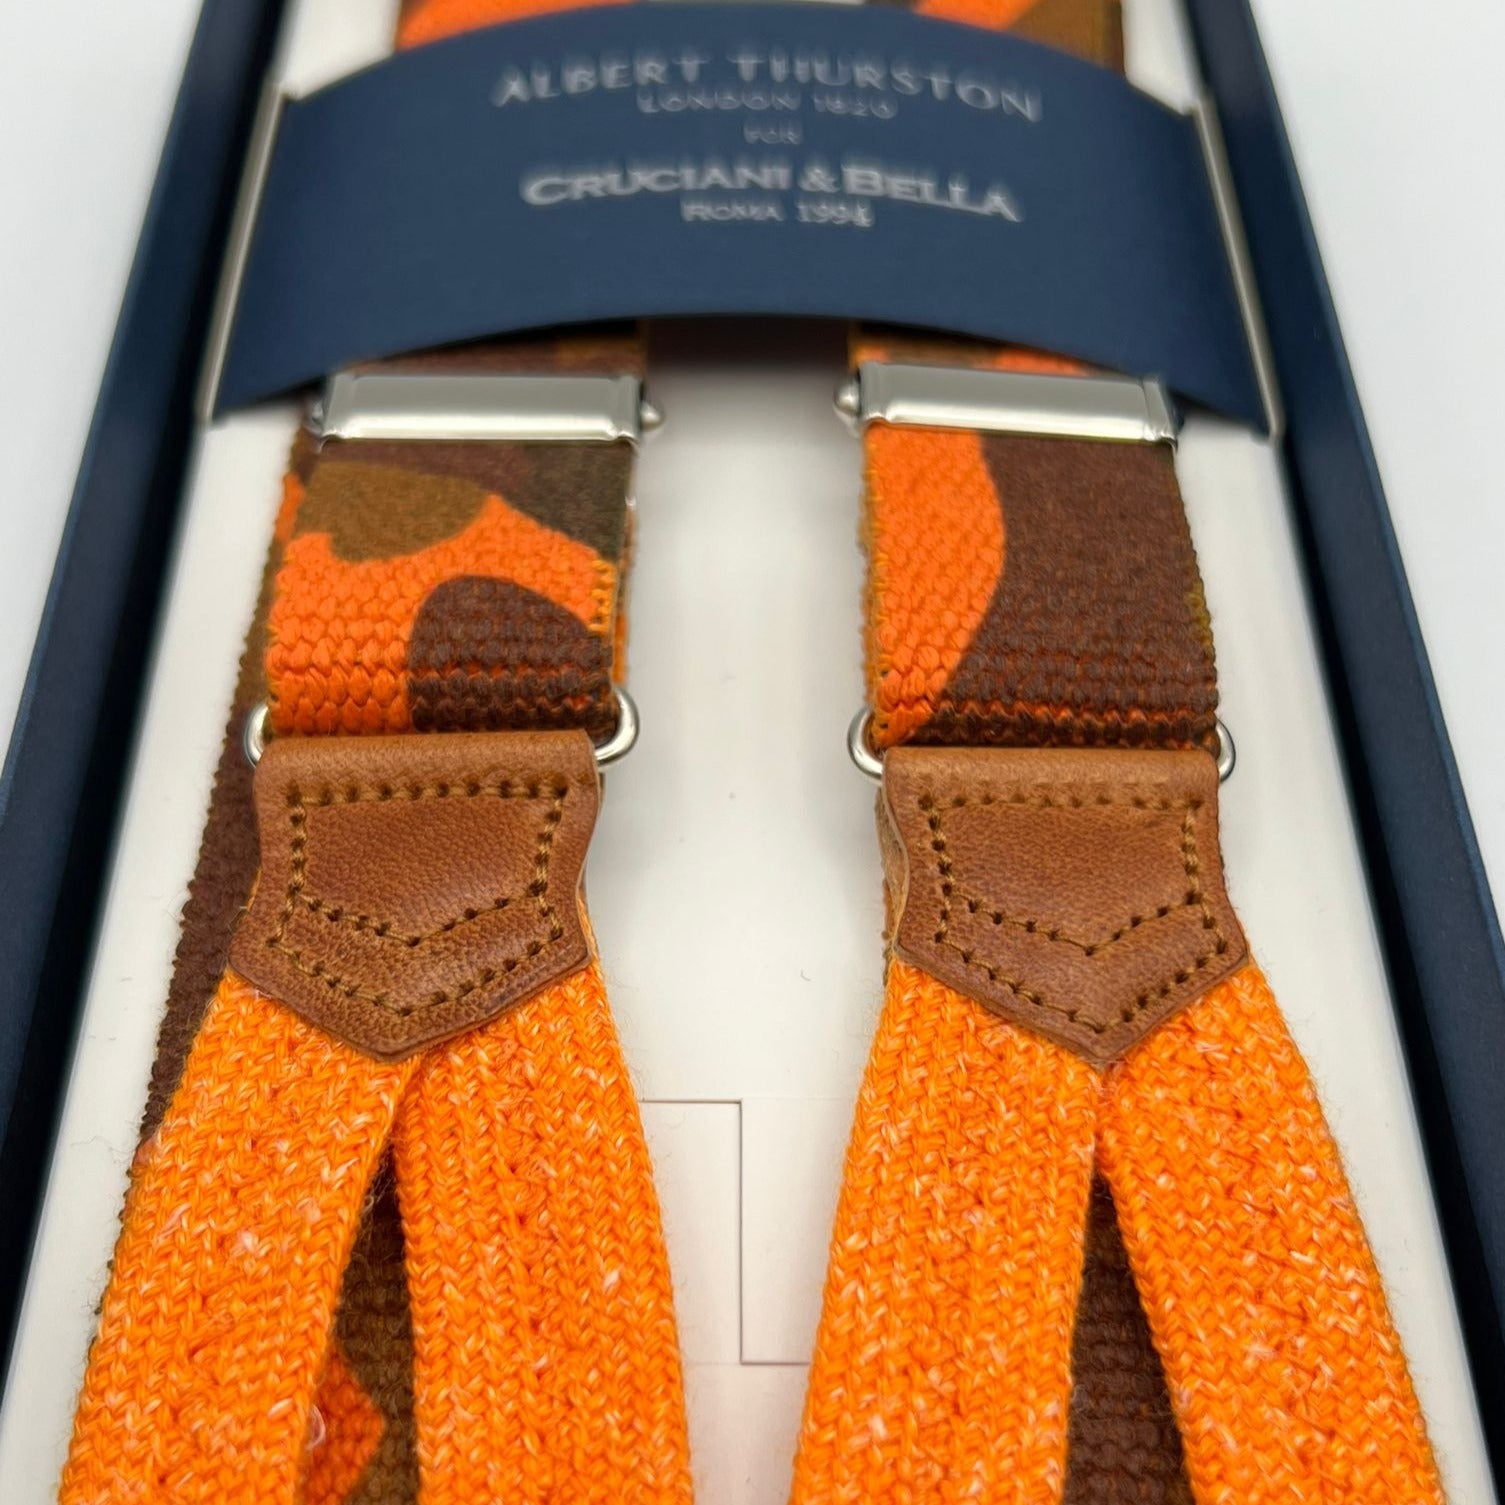 Albert Thurston for Cruciani & Bella Made in England Adjustable Sizing 25 mm elastic braces Orange and Brown Military Motif Braid ends Y-Shaped Nickel  Fittings Size: L #7478